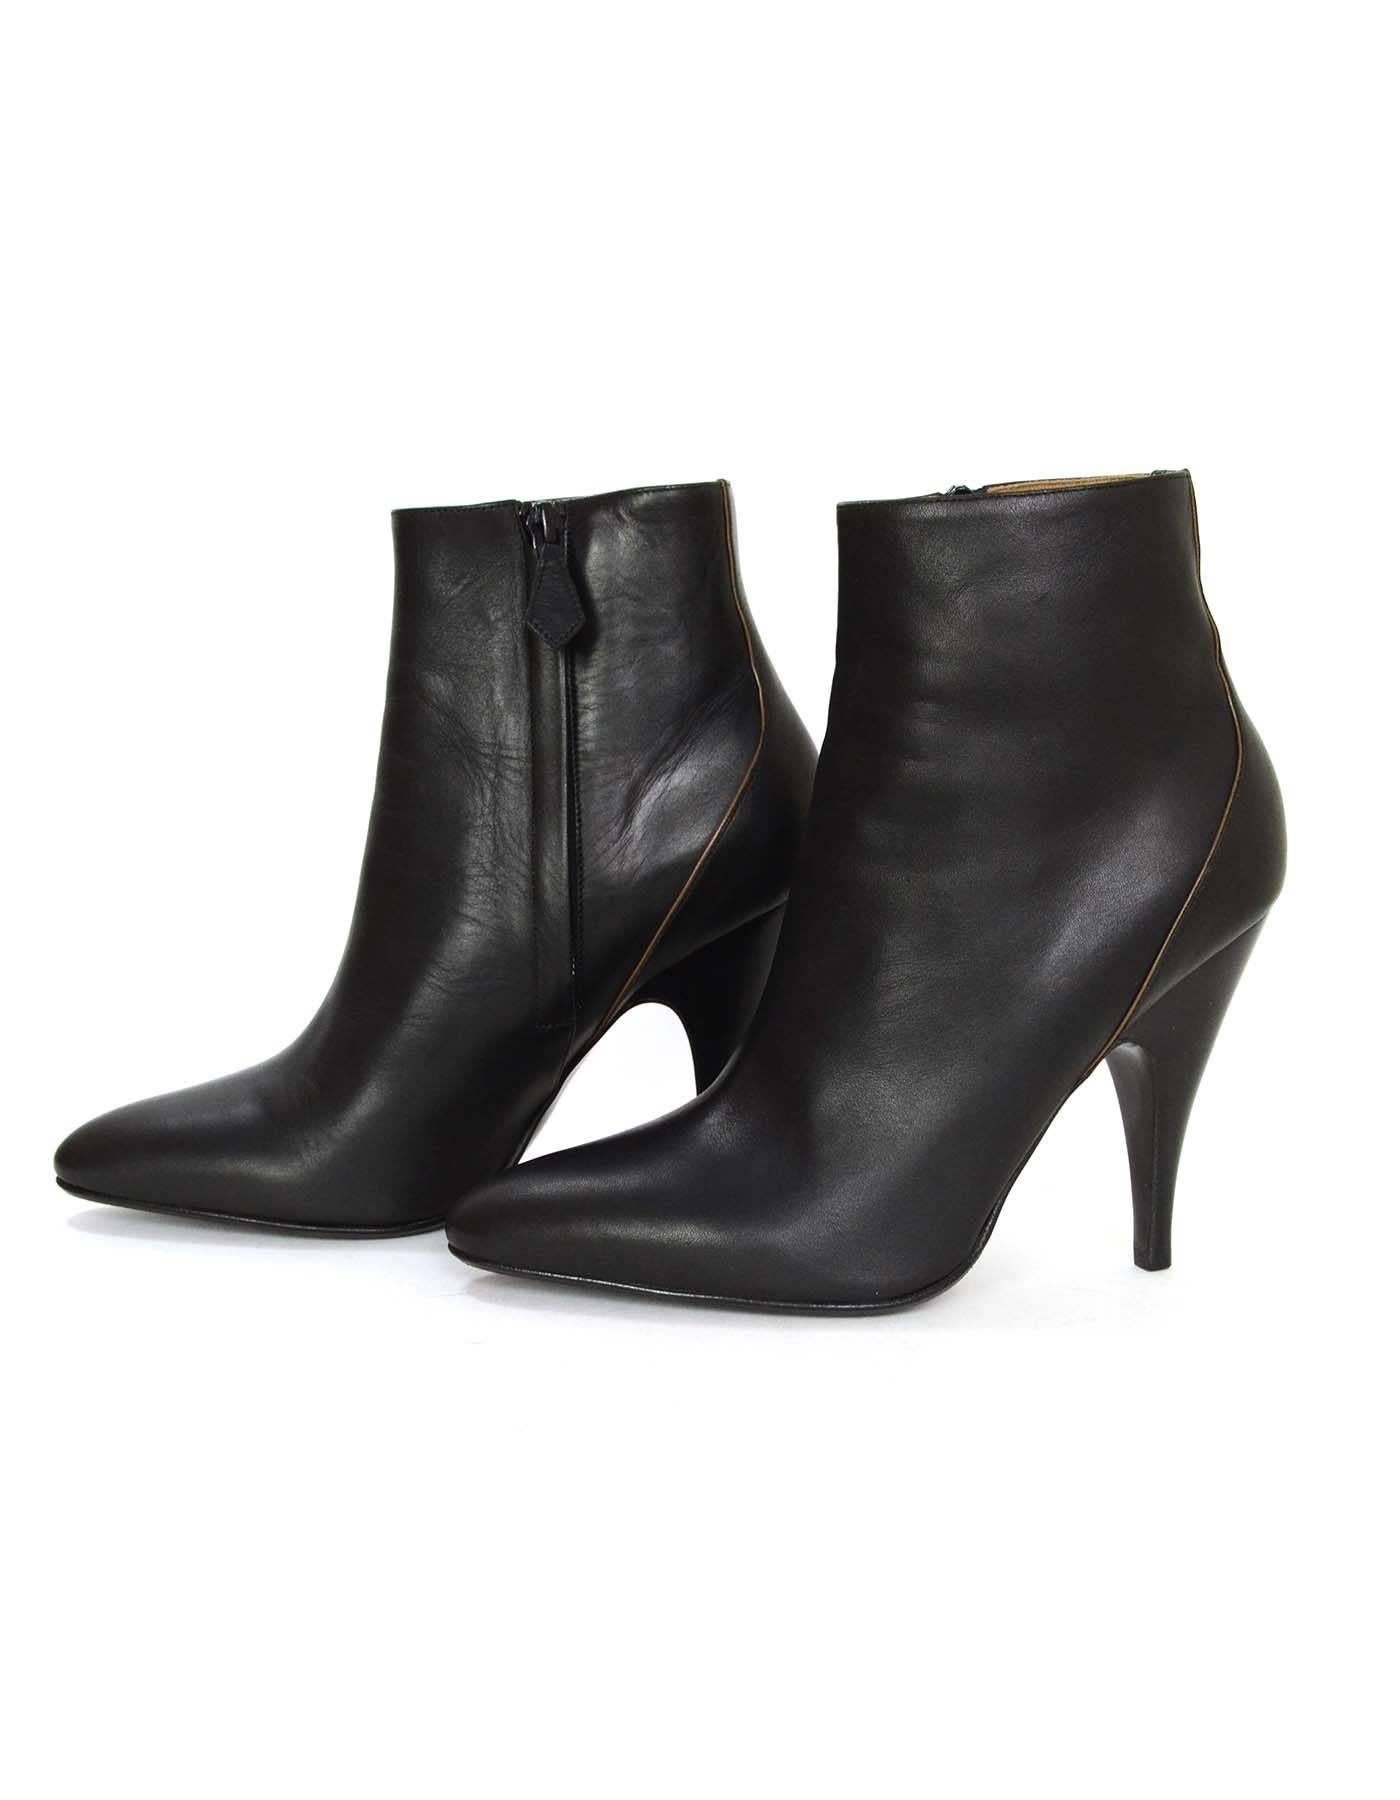 Hermes Black Leather Ankle Booties 
Made In: Italy
Color: Black
Materials: Leather
Closure/Opening: Inside ankle zipper
Sole Stamp: Hermes 37 Semelle Cuir Made in Italy
Overall Condition: Excellent pre-owned condition
Includes: Hermes box and